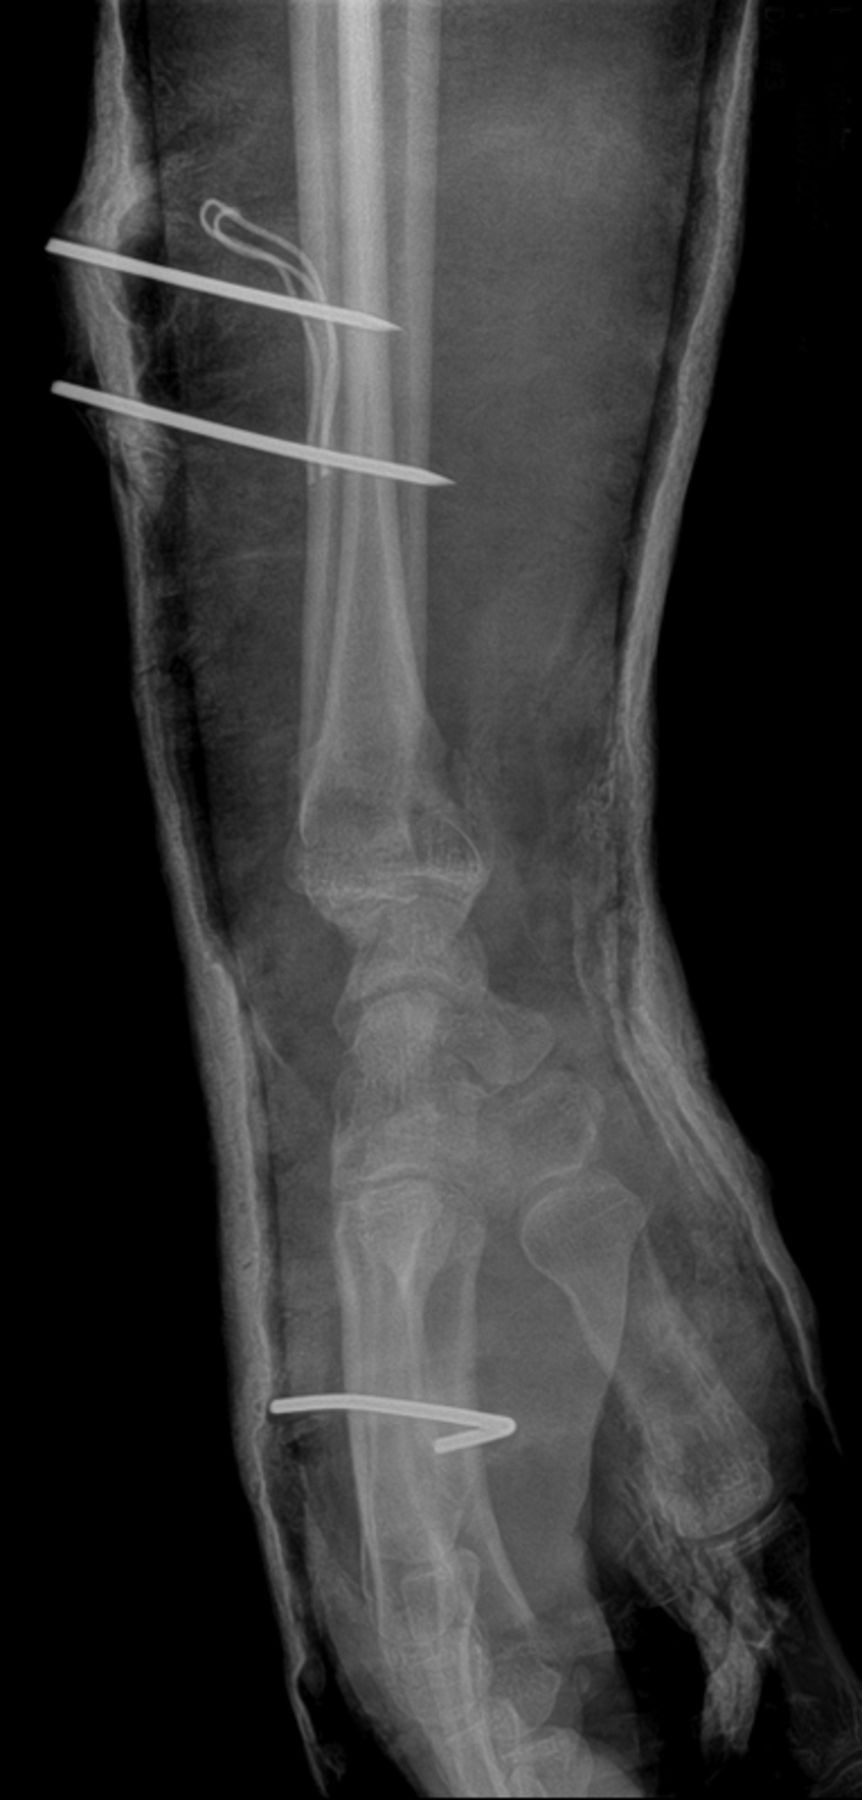 Figs. 1a - 1b 
            Radiographs showing a) an
anteroposterior view with two pins inserted proximal to the fracture
site, providing a buttress to maintain alignment. Another pin is
inserted in the second and third metacarpal bone, with the pin bent
at the radial side. The b) lateral view shows pins which engaged
both cortices of the bone, and remained out of the skin
          